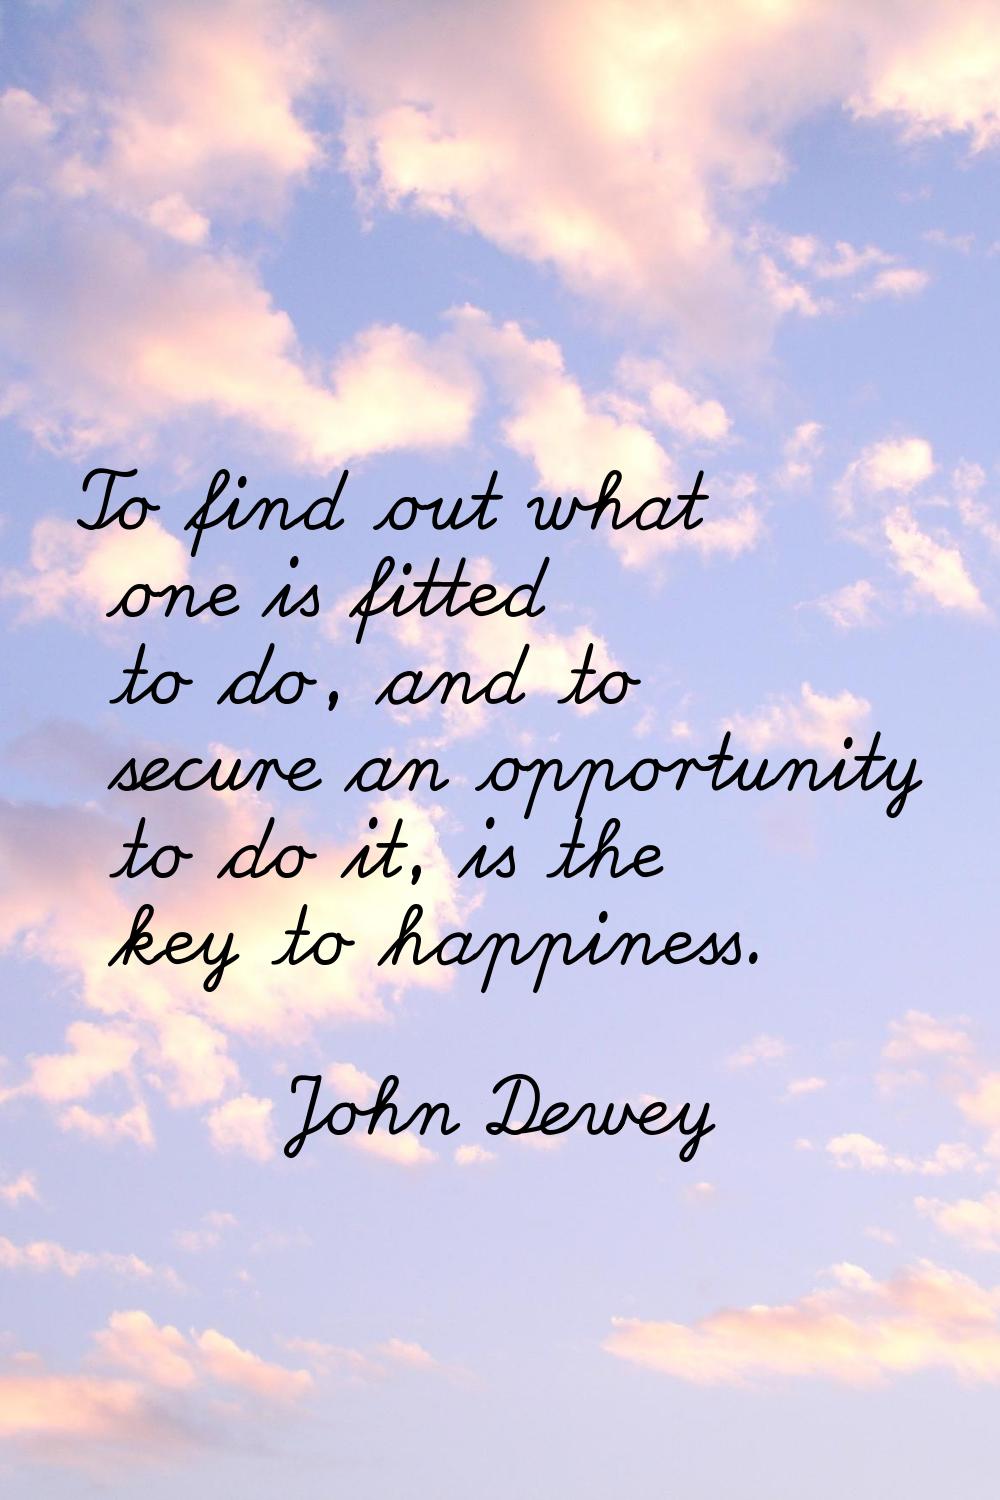 To find out what one is fitted to do, and to secure an opportunity to do it, is the key to happines